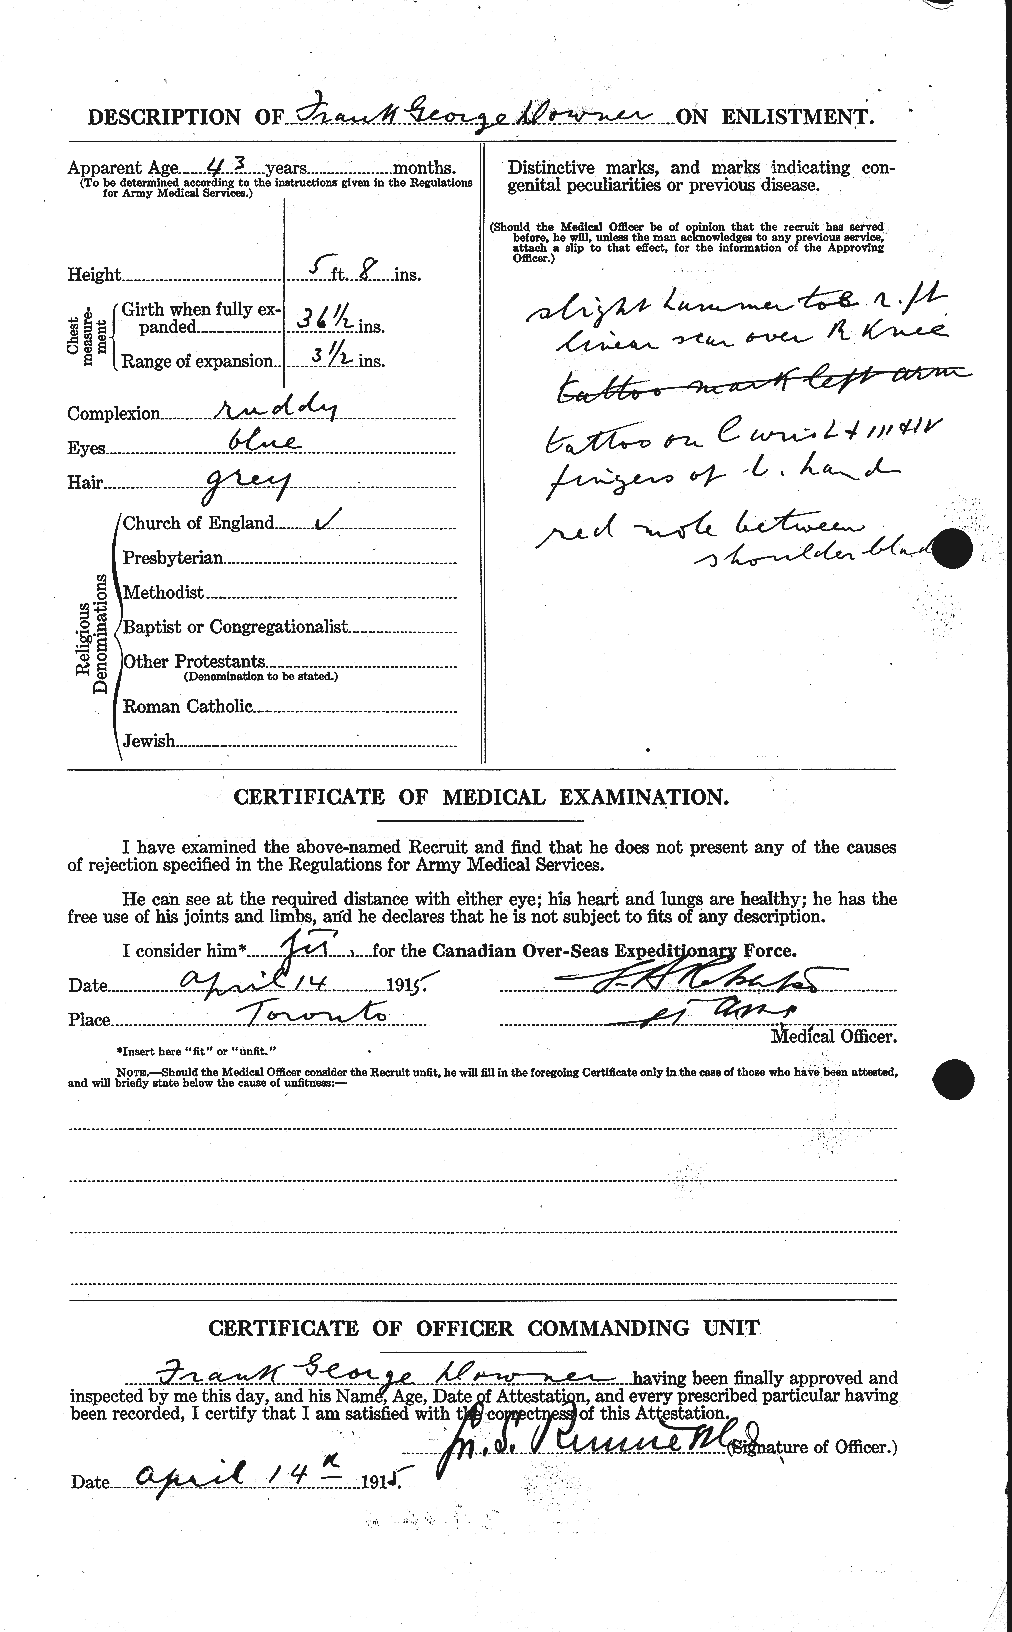 Personnel Records of the First World War - CEF 301094b